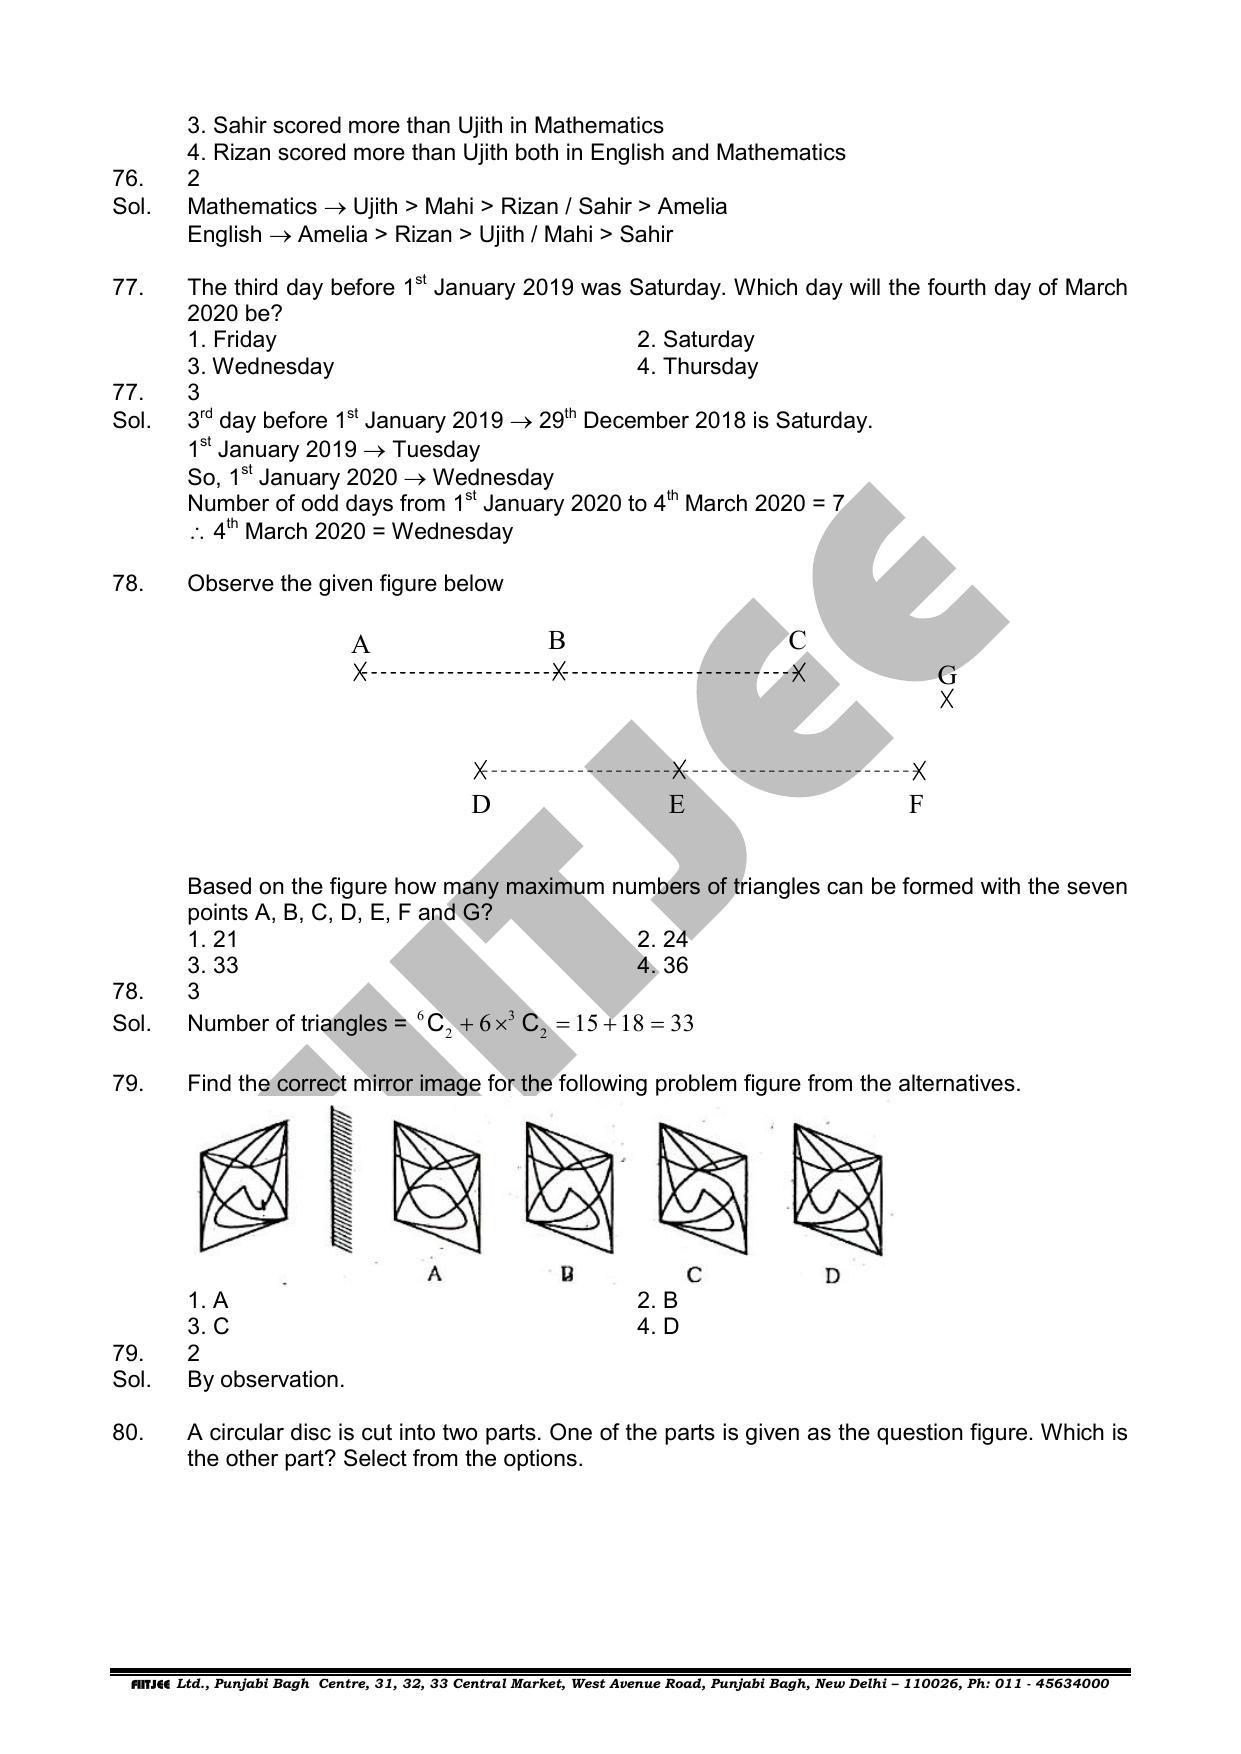 NTSE 2019 (Stage II) MAT Question Paper with Solution (June 16, 2019) - Page 25